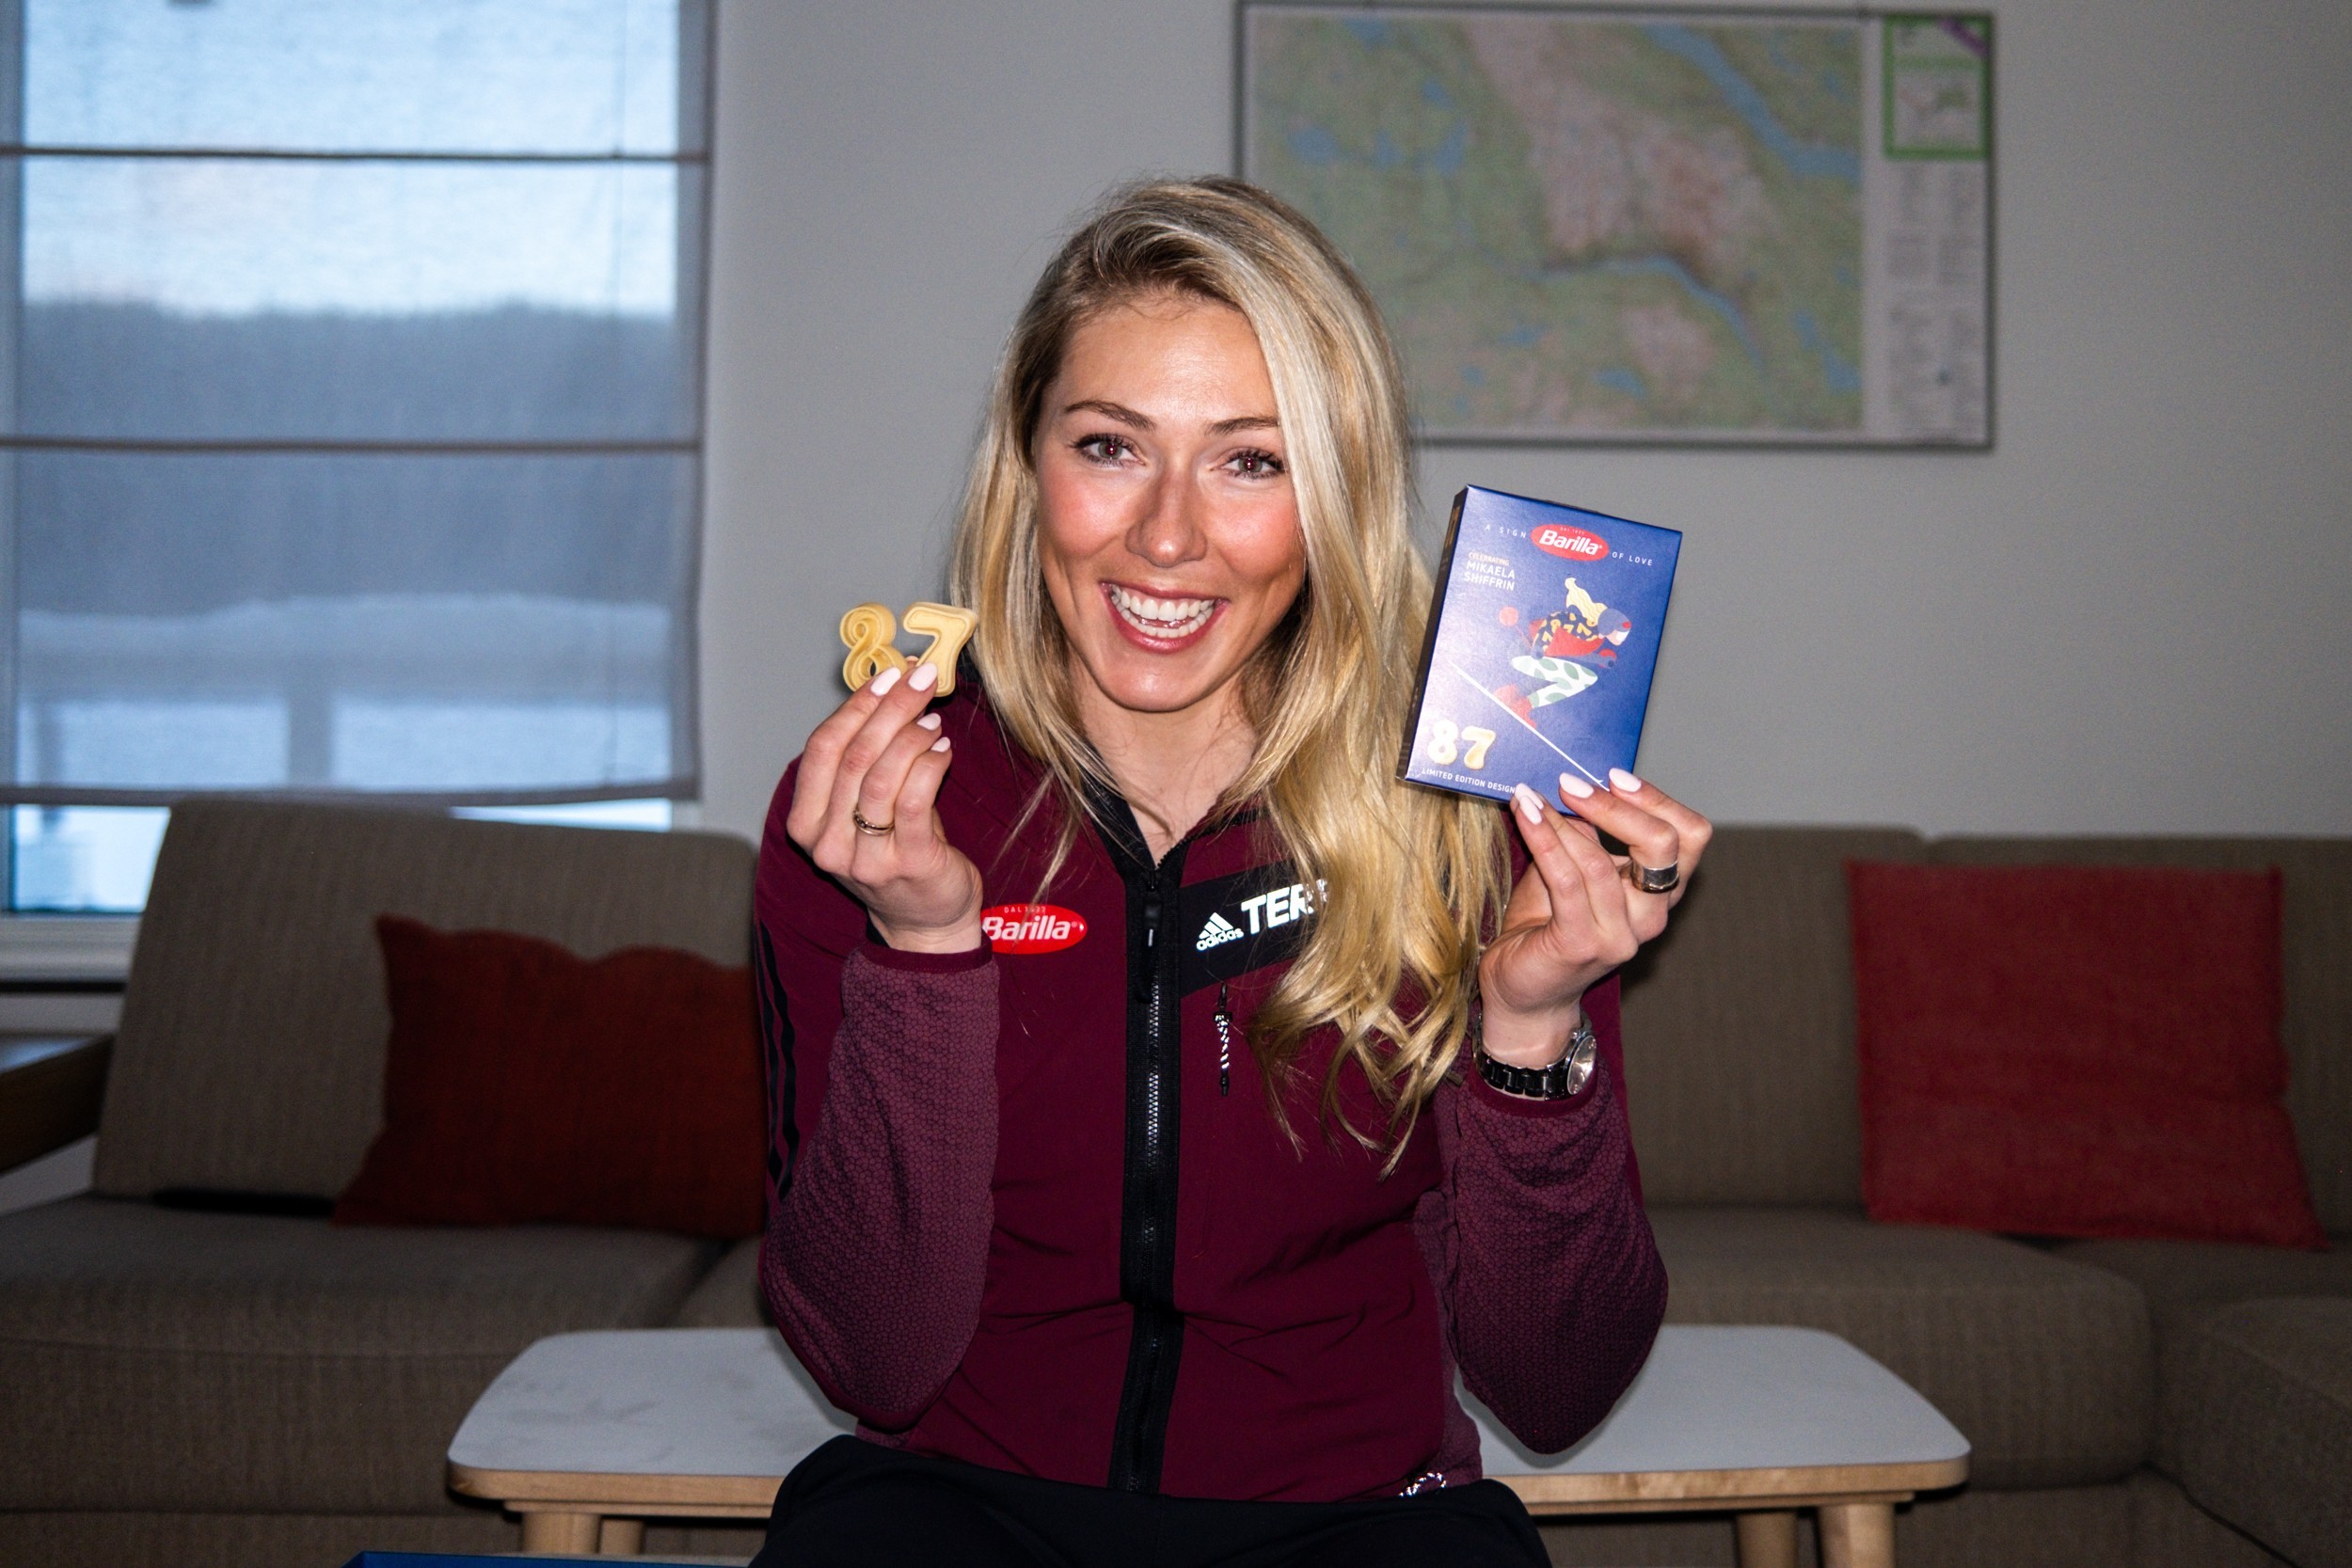 Barilla & Mikaela Shiffrin: Greatness starts with a great recipe - Pack No. 33